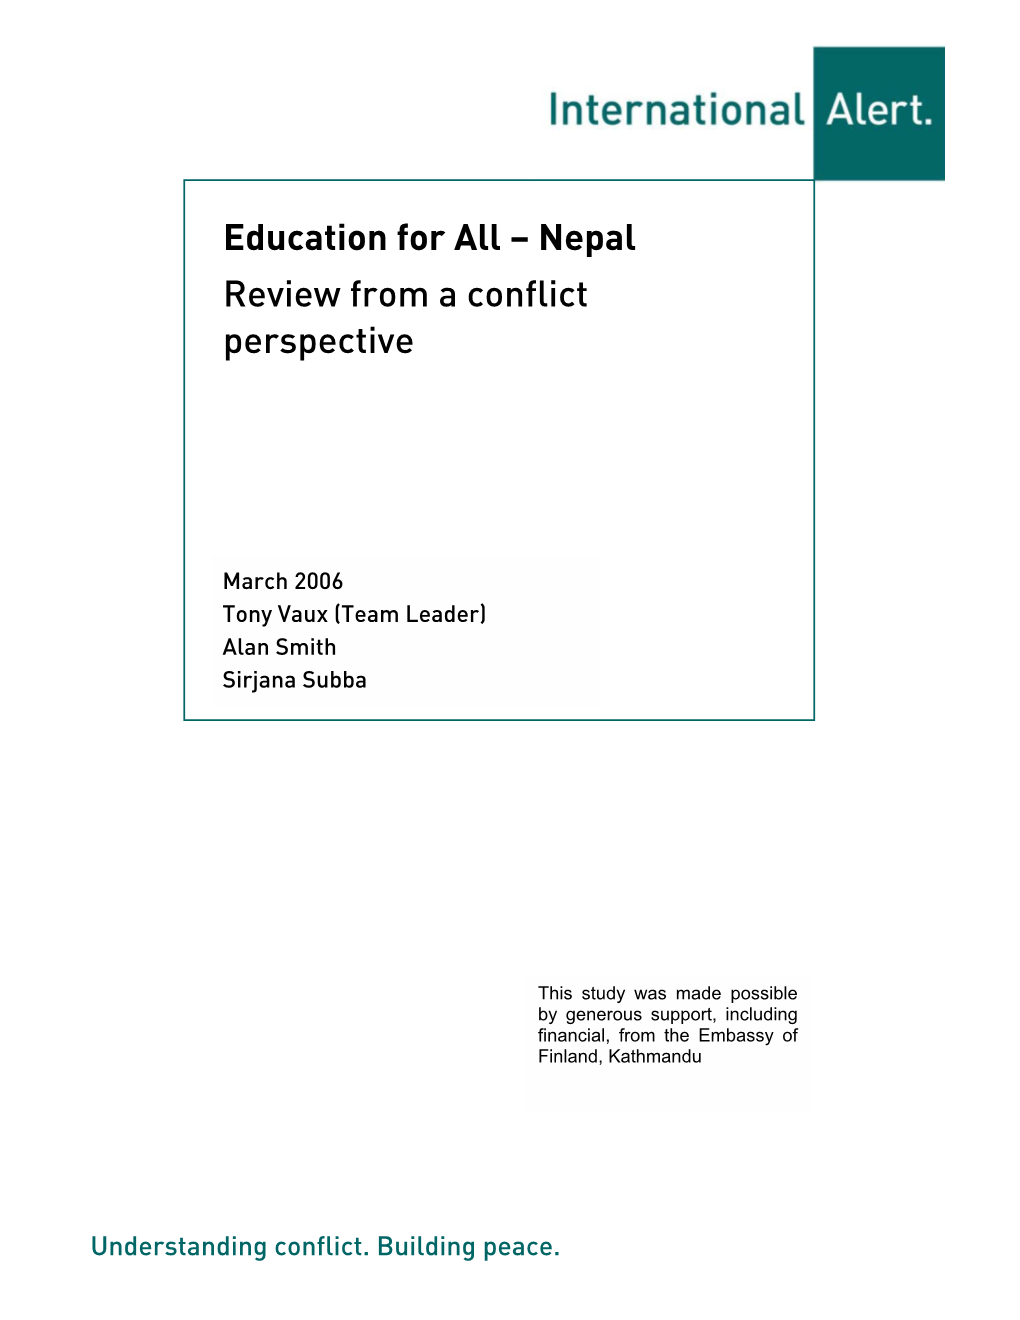 Education for All Nepal